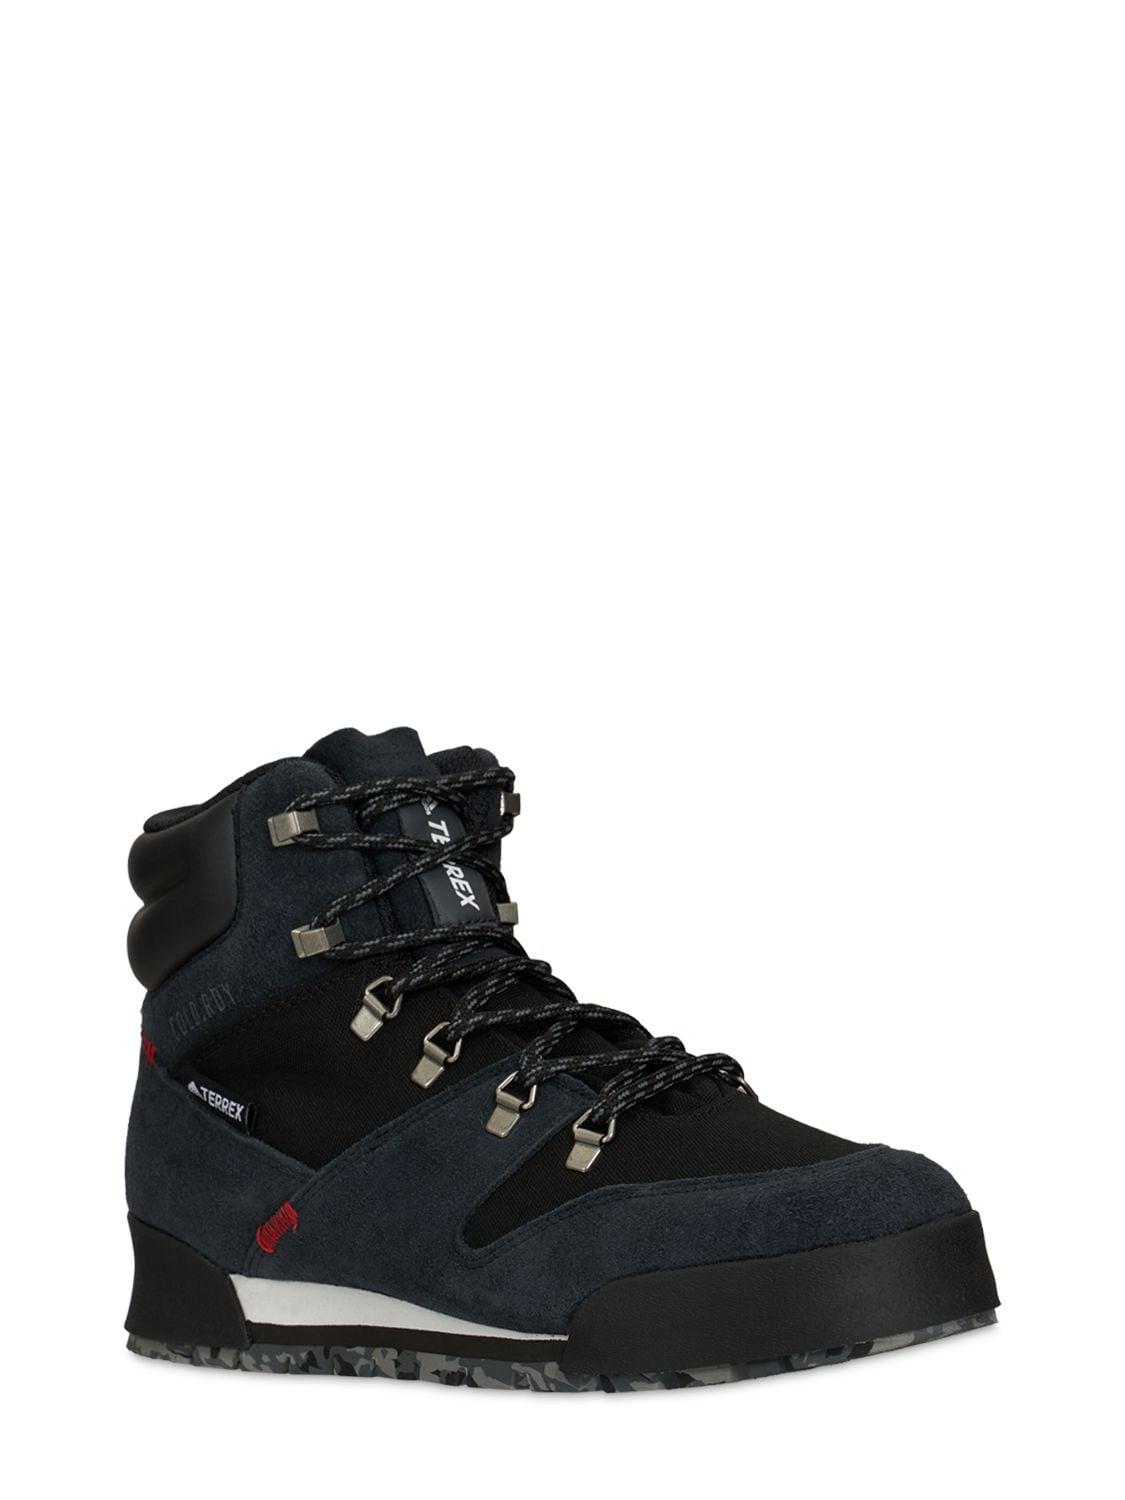 adidas Originals Terrex Snowpitch Cold.rdy Boots in Black | Lyst